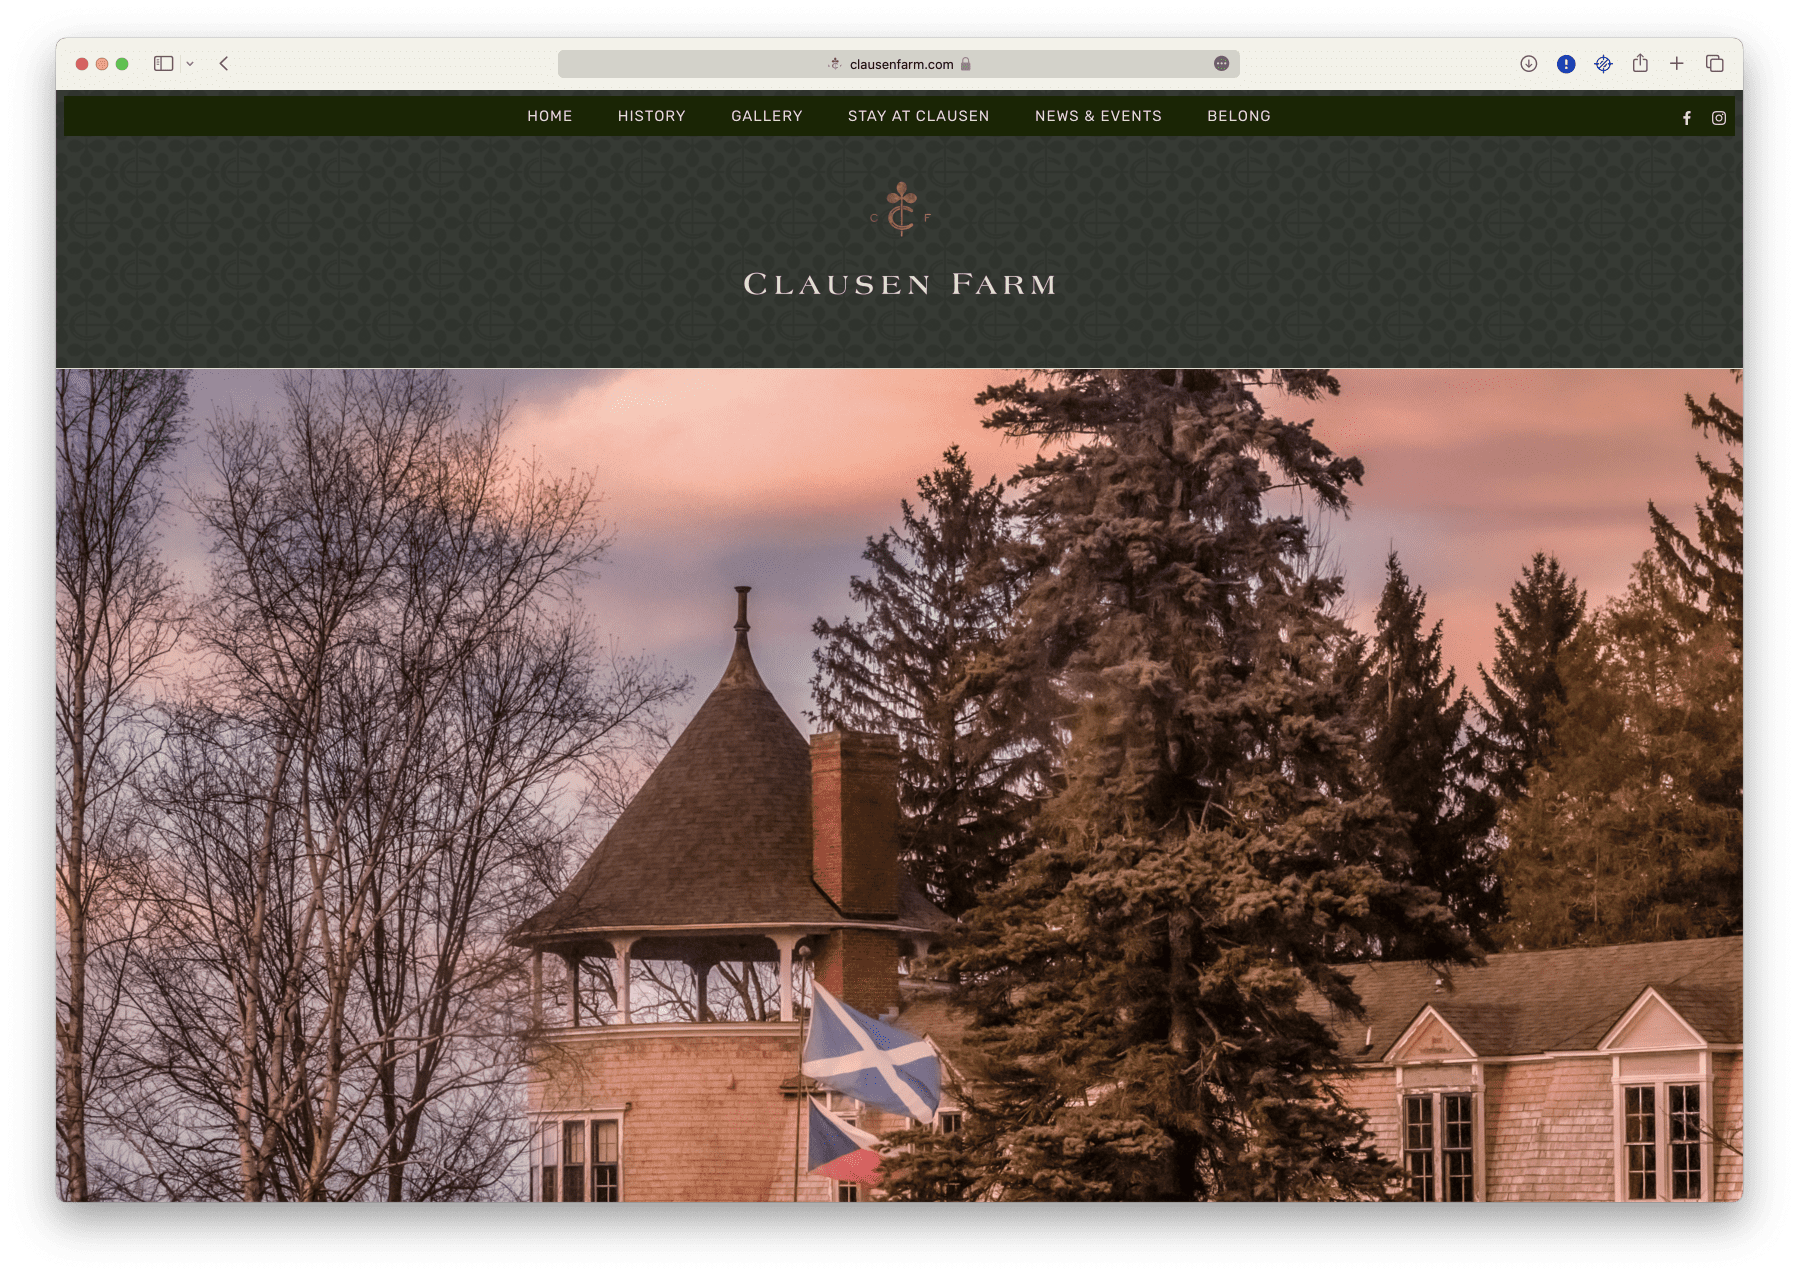 The web page created for Clausen Farm